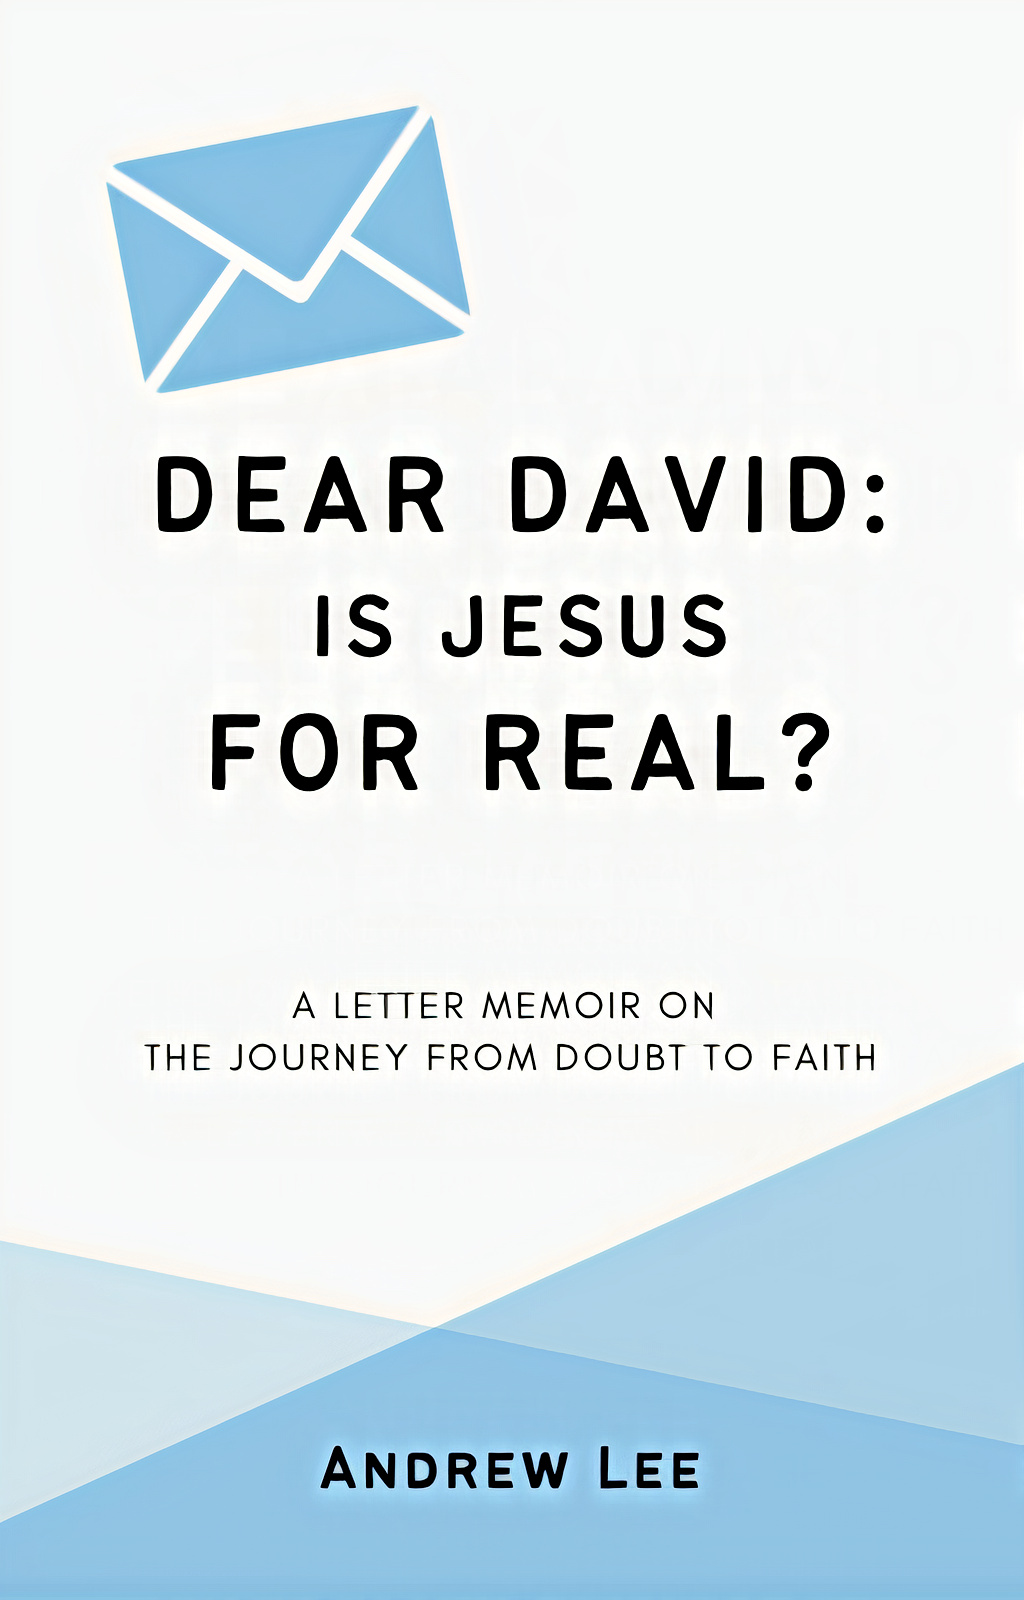 FREE: Dear David: Is Jesus for Real? by Andrew Lee